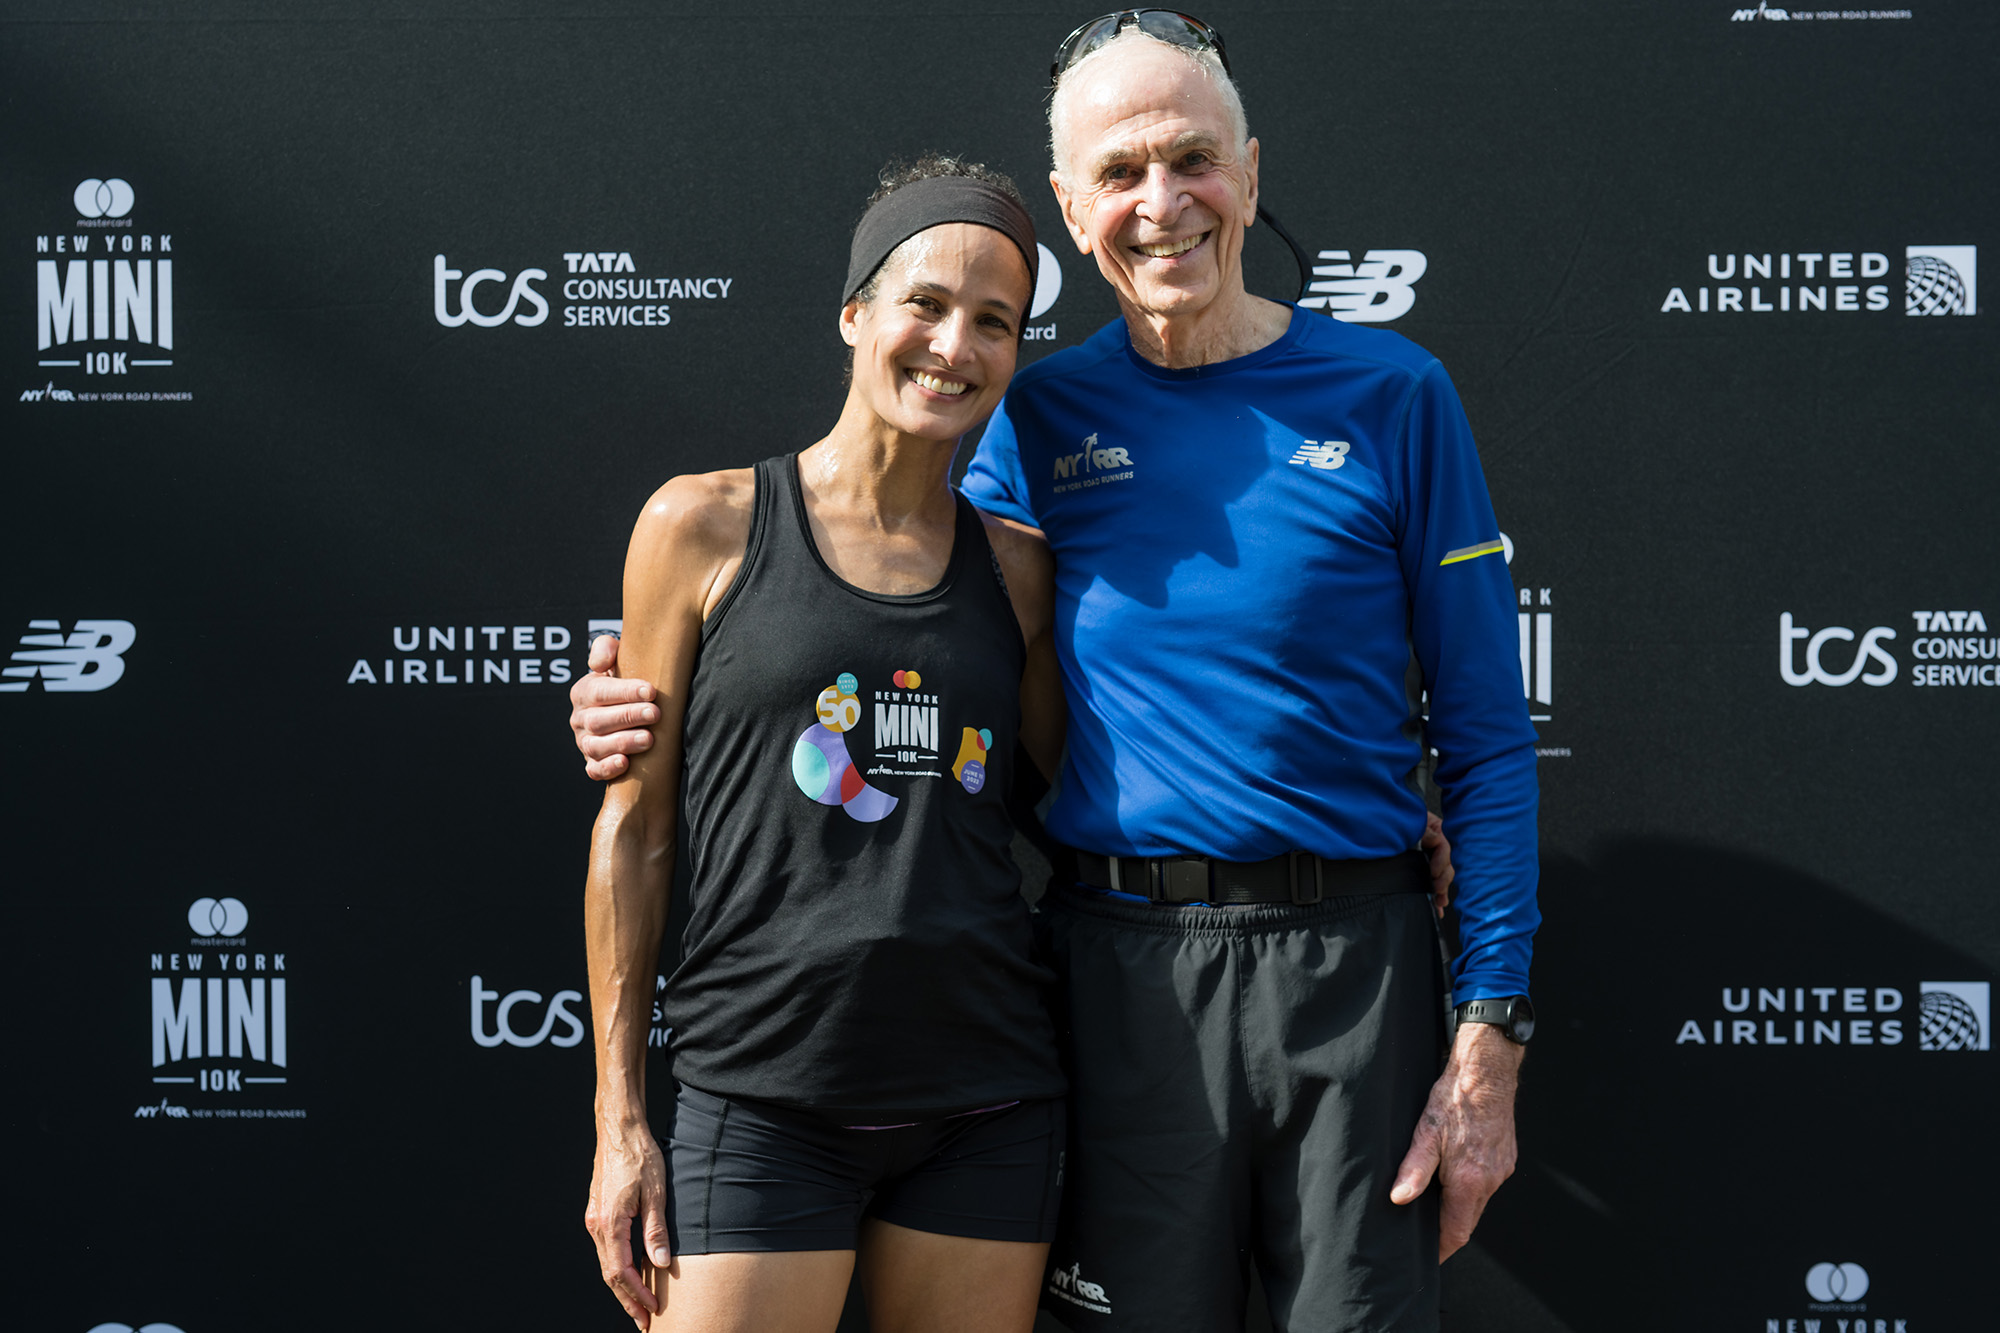 Nnenna Lynch and George Hirsch at the 2023 New York Mini 10K